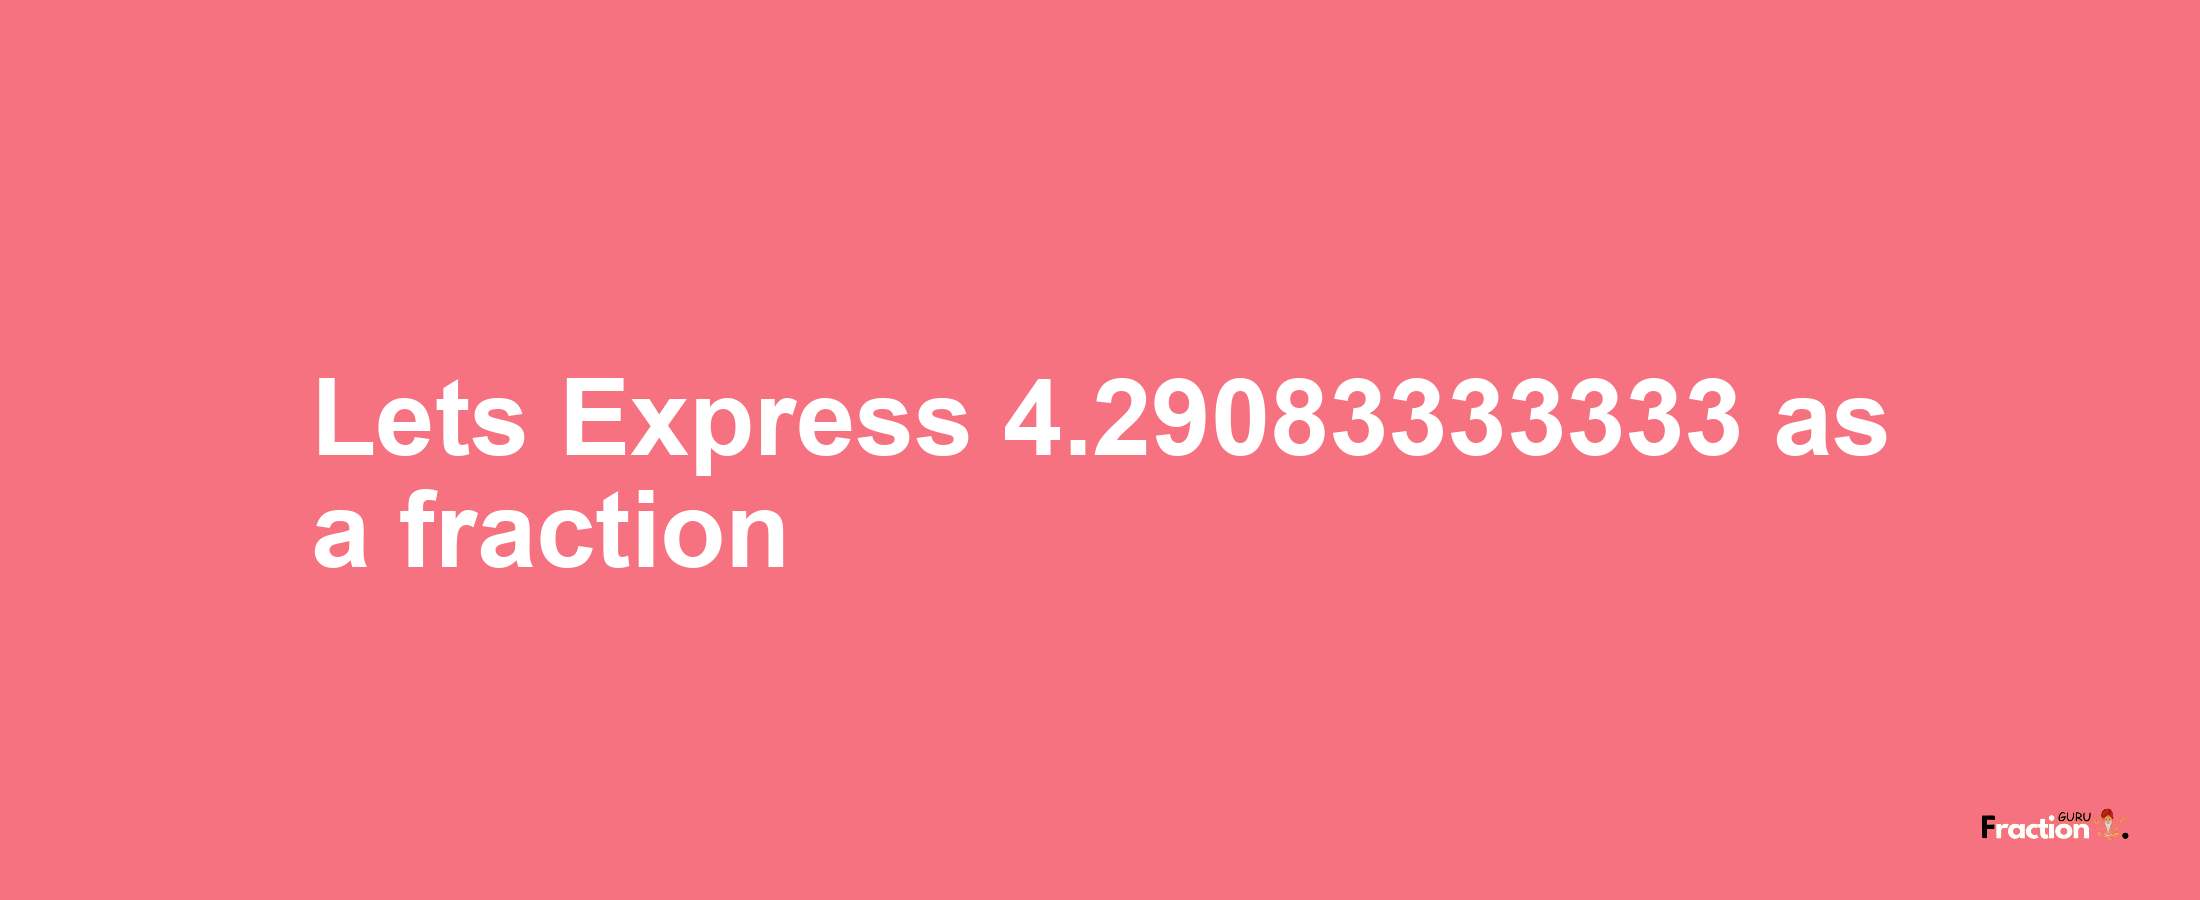 Lets Express 4.29083333333 as afraction